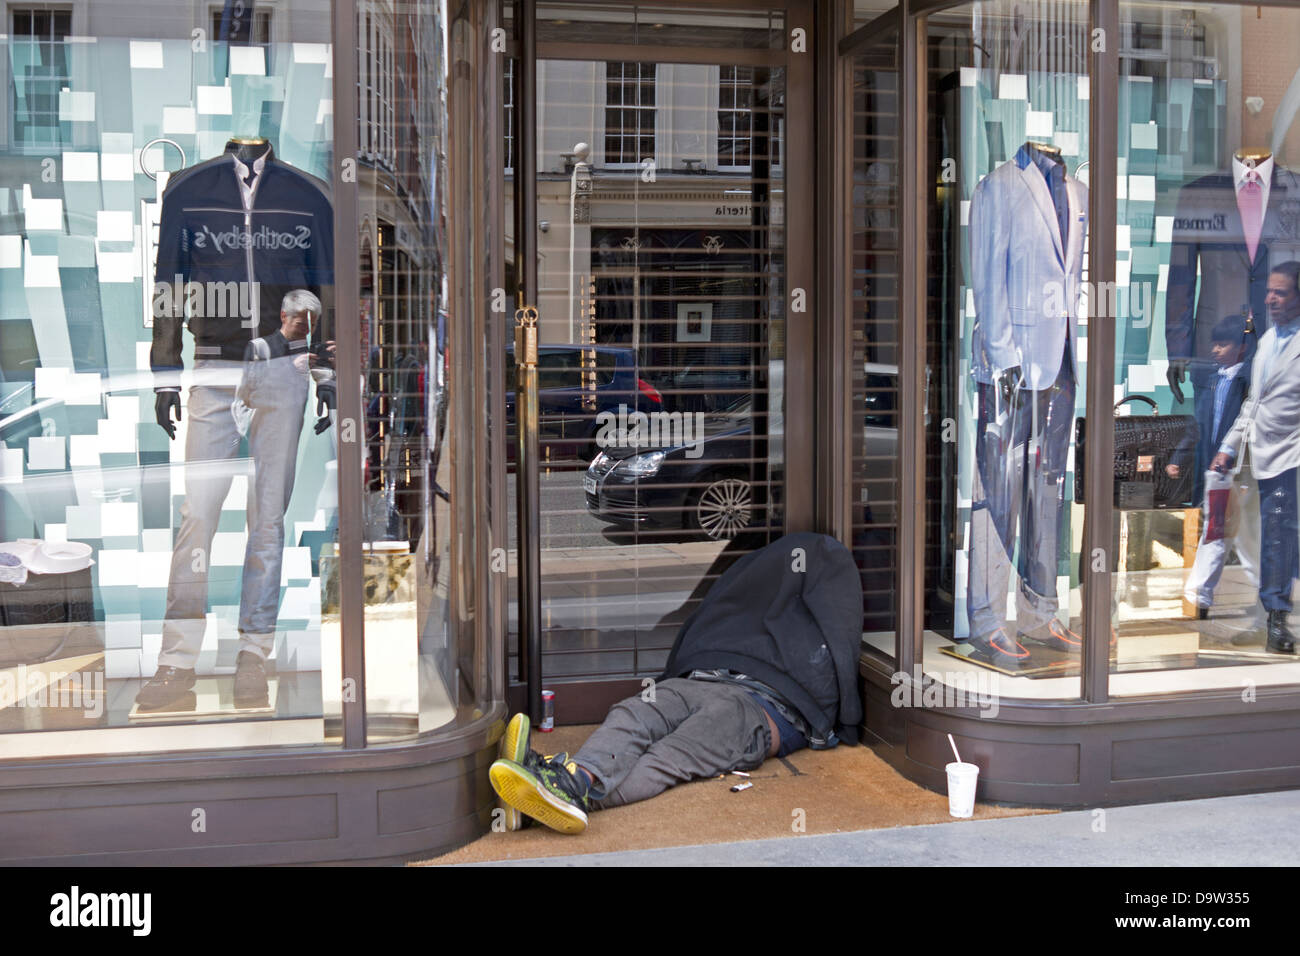 A homeless person is slumped in a doorway of an upmarket clothes store. Landscape view. Stock Photo